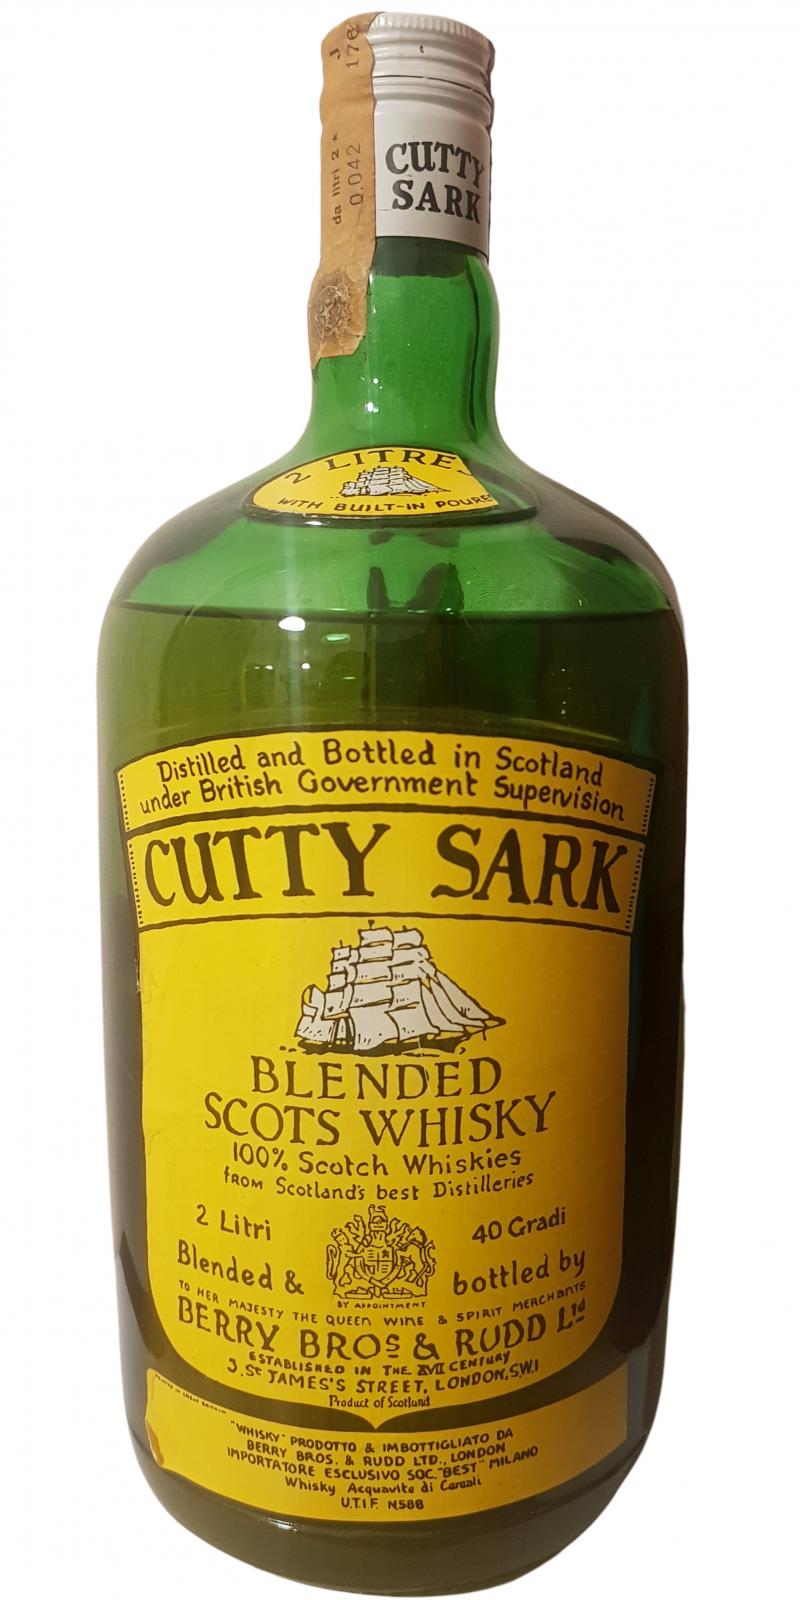 Cutty Sark Blended Scots Whisky SOC. best Milano 40% 2000ml